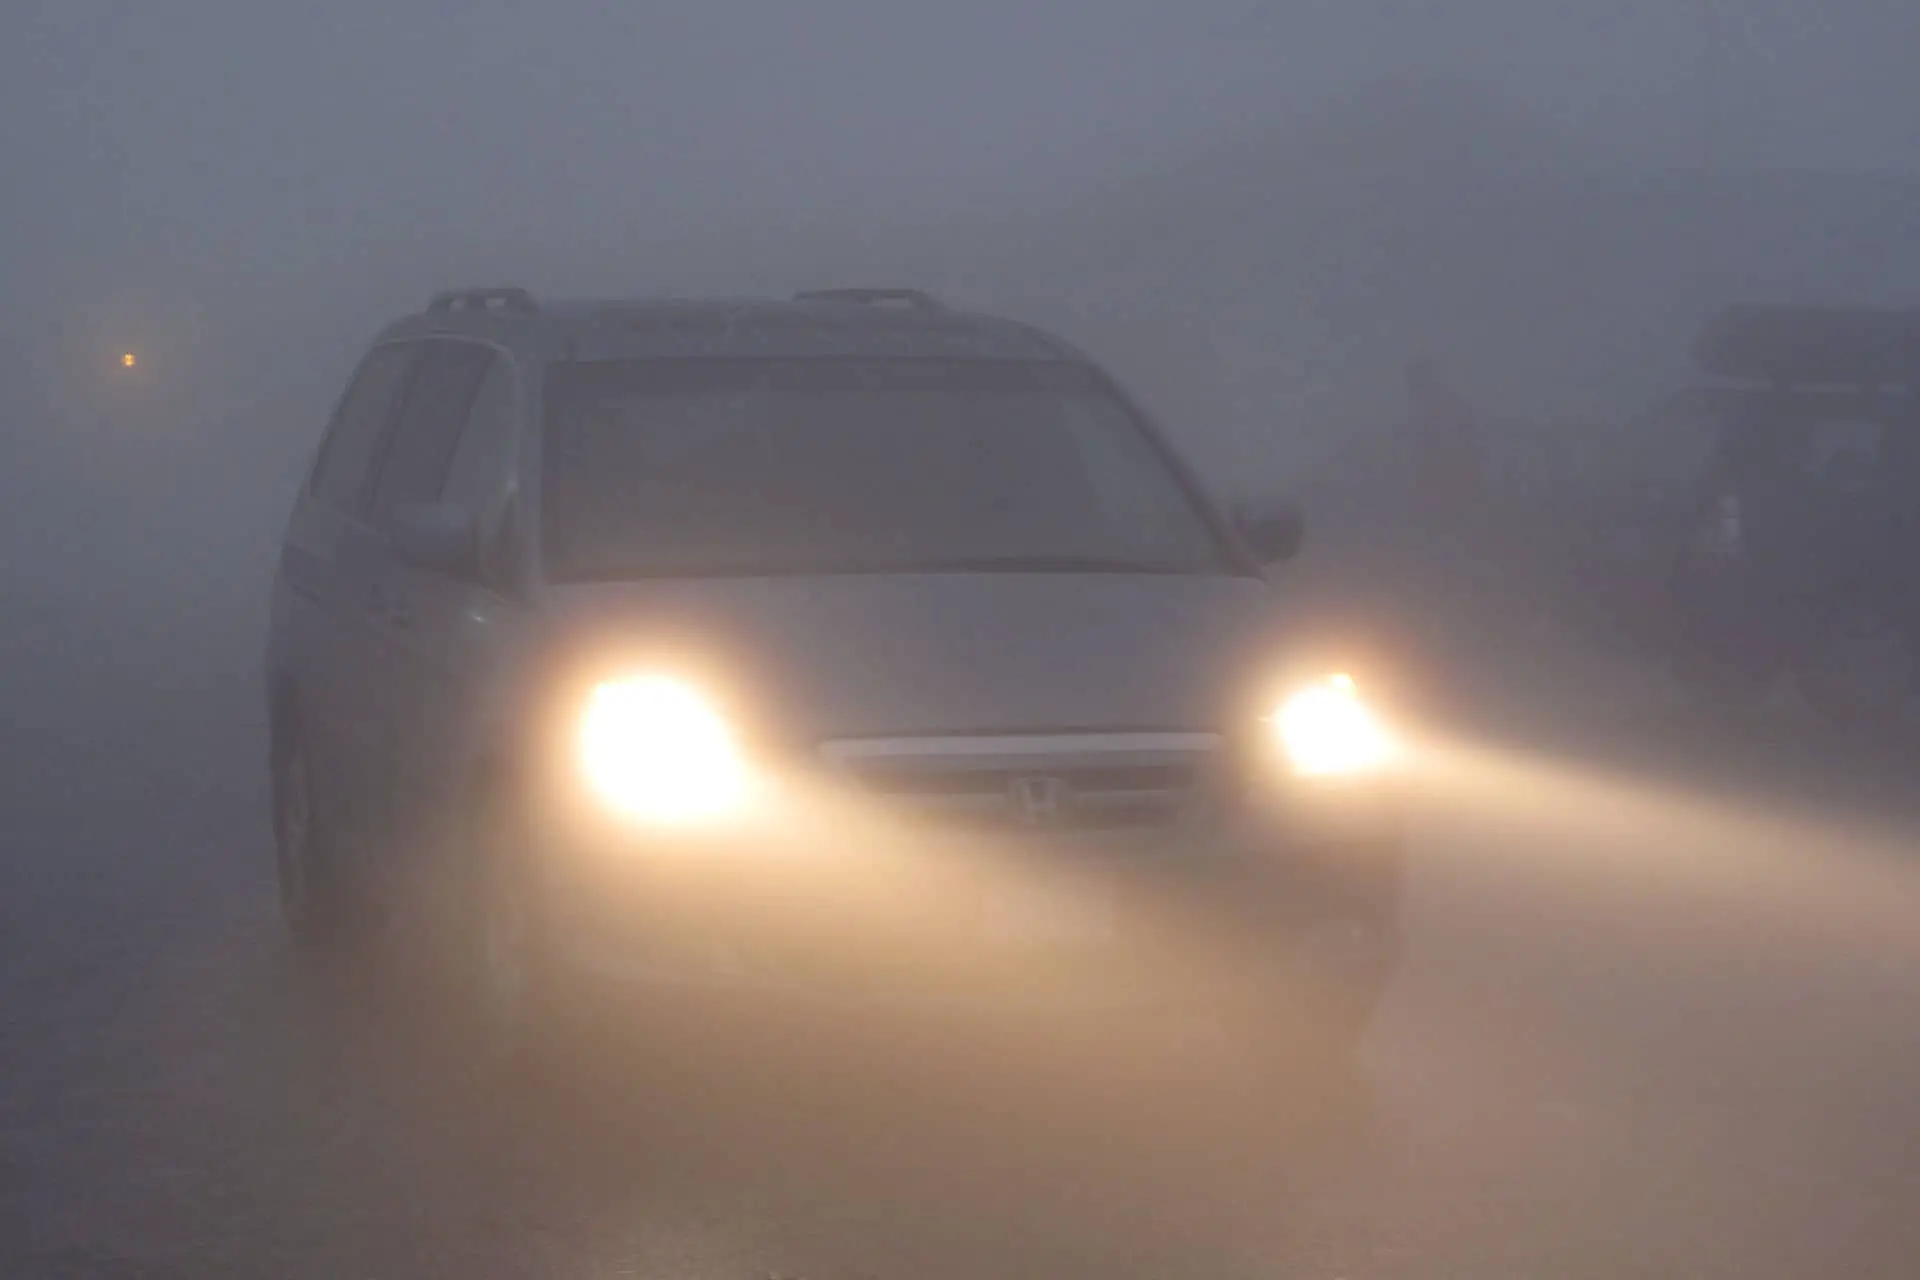 Letter: Please use your headlights when driving through fog